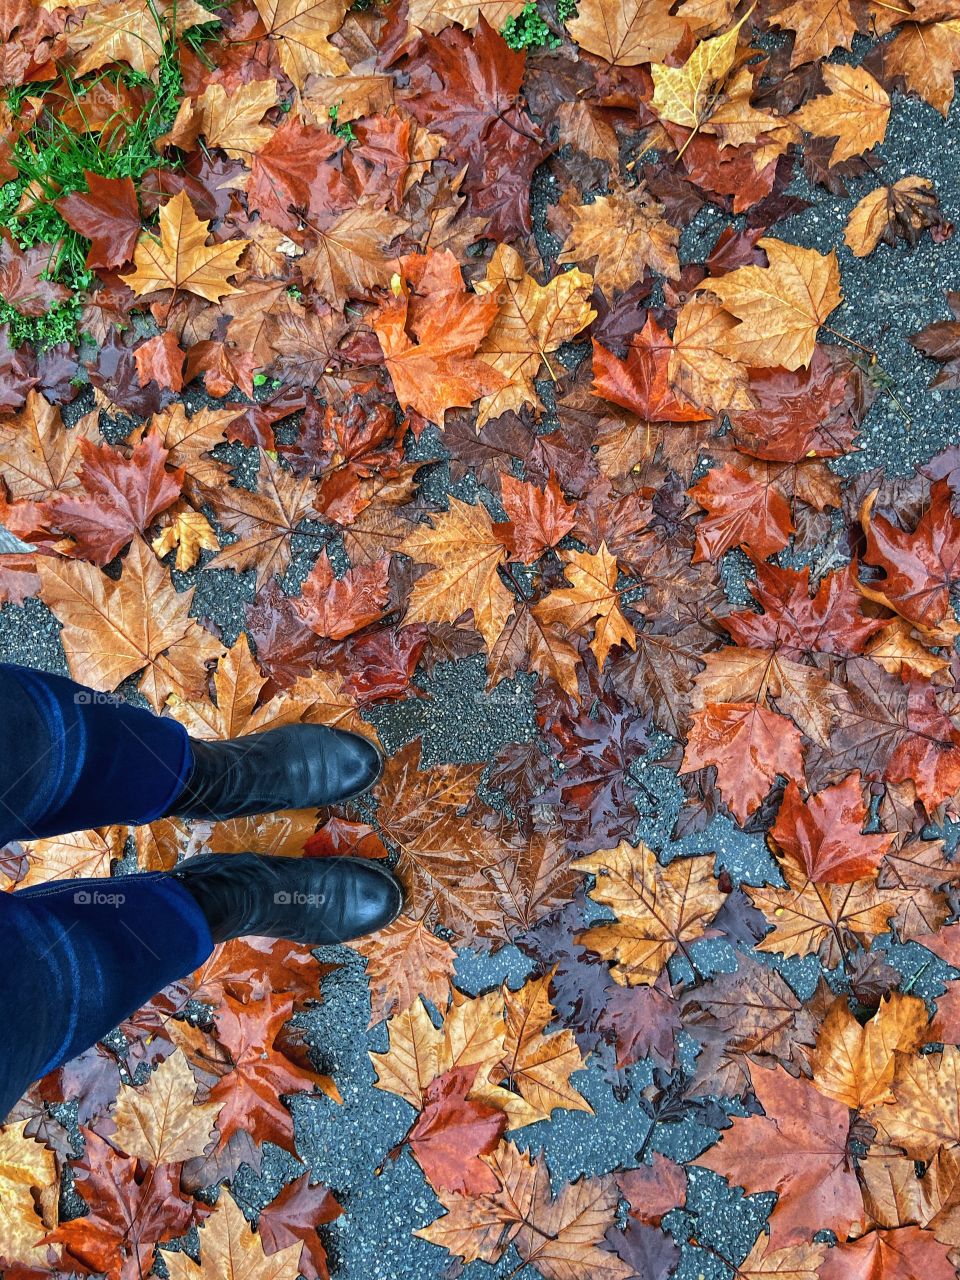 Fallen leaves on the ground 